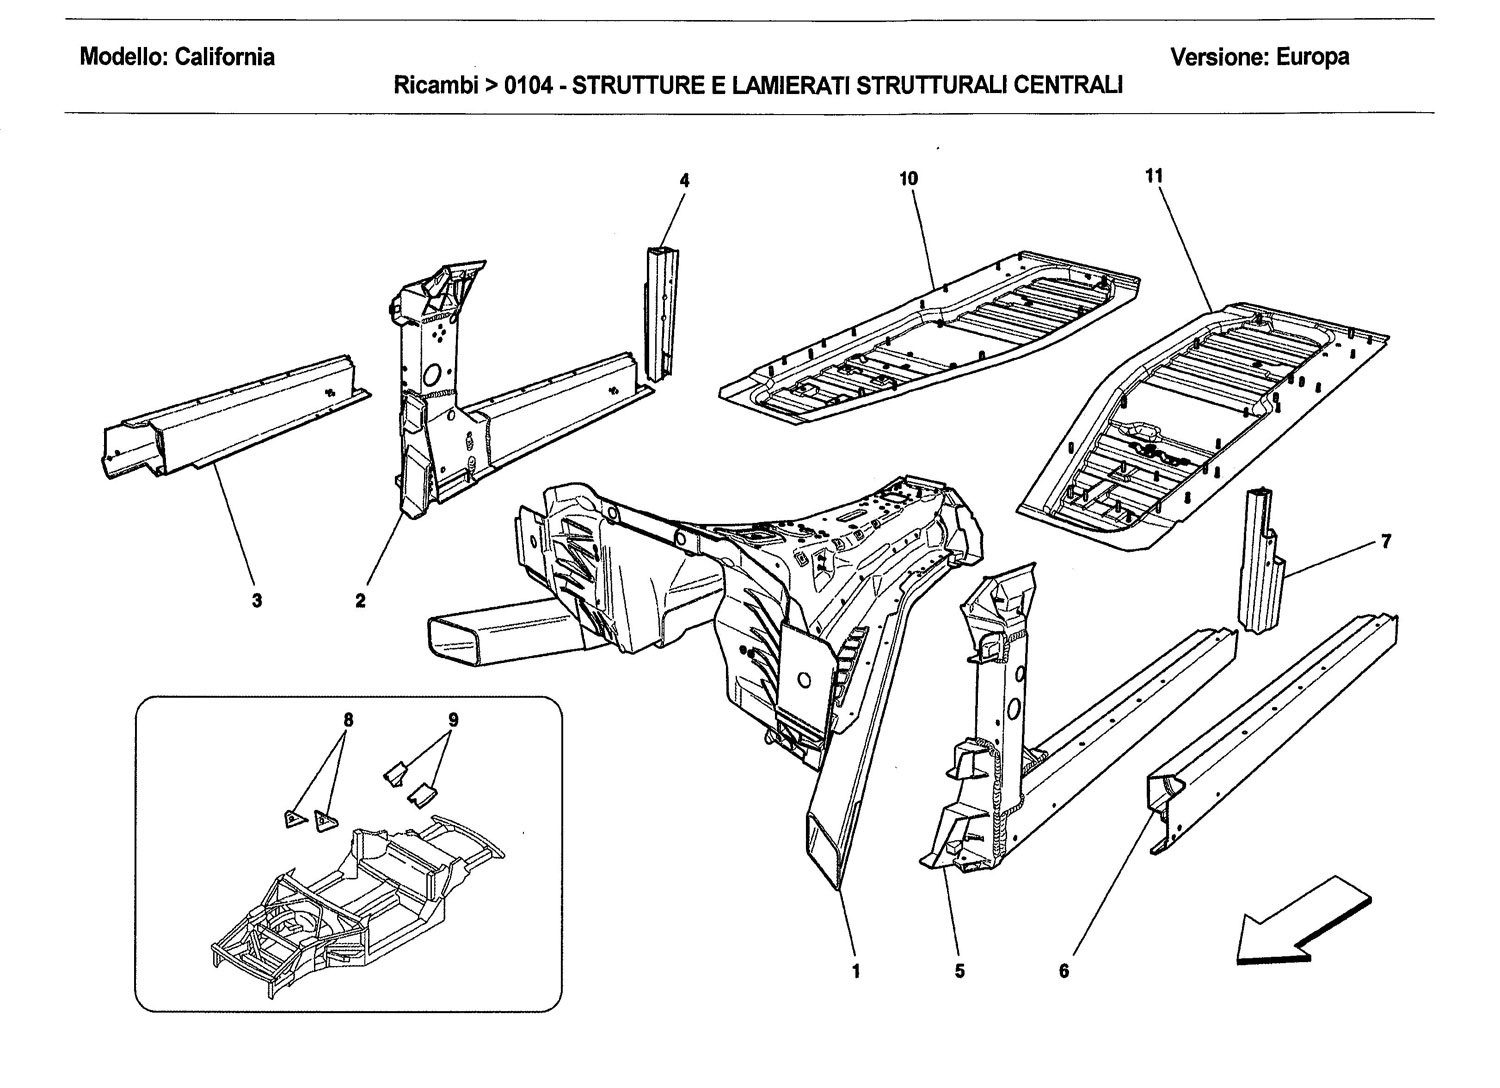 CENTRAL STRUCTURES AND CHASSIS BOX SECTIONS